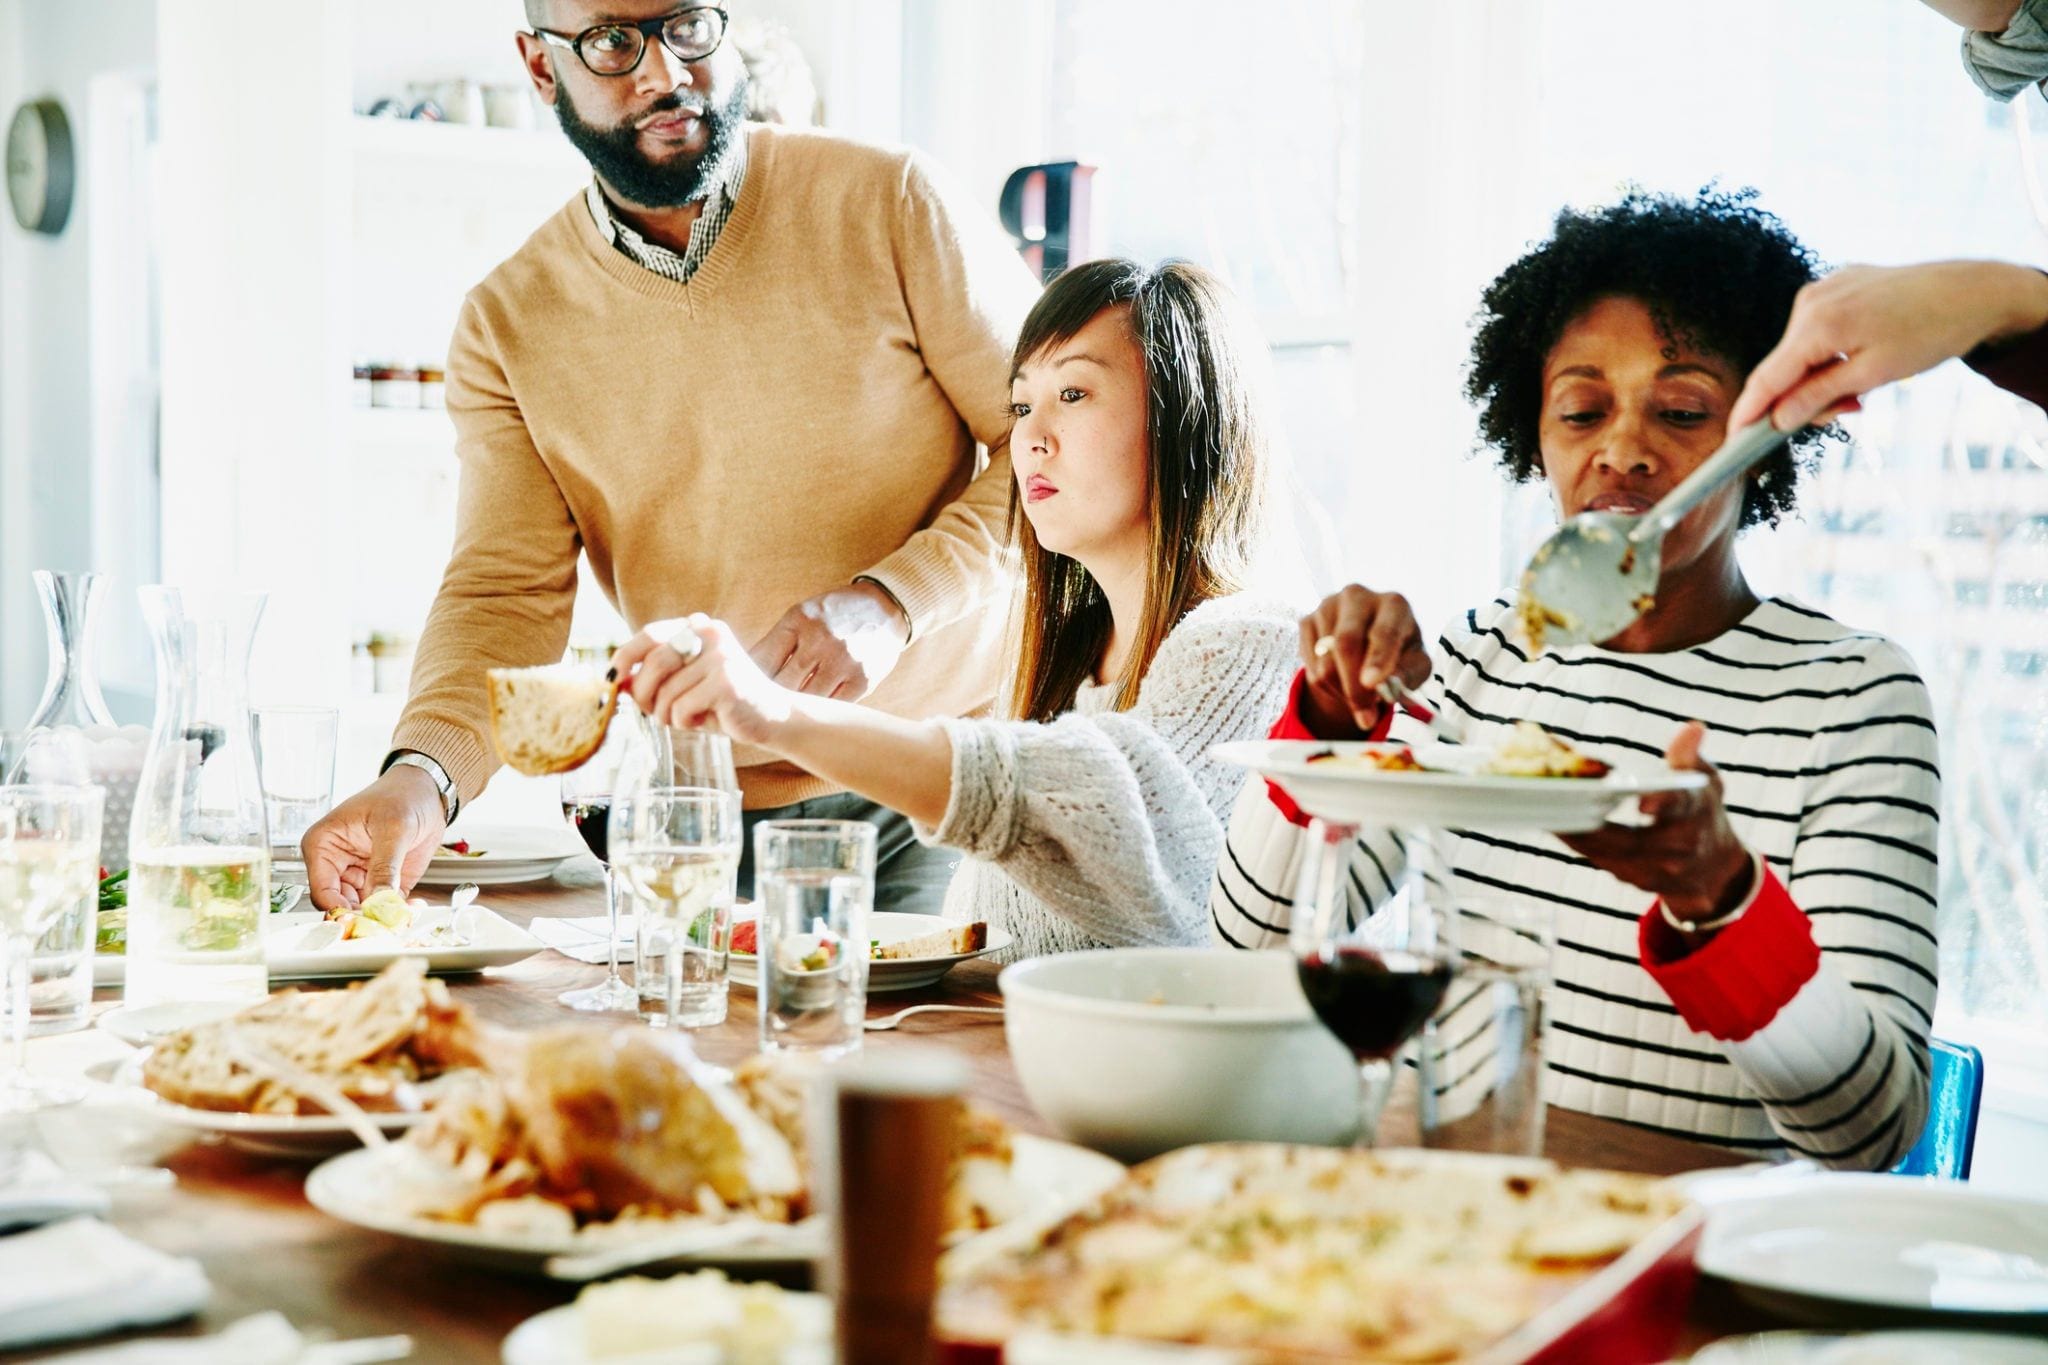 How to deal with toxic family members during the happiest time of year